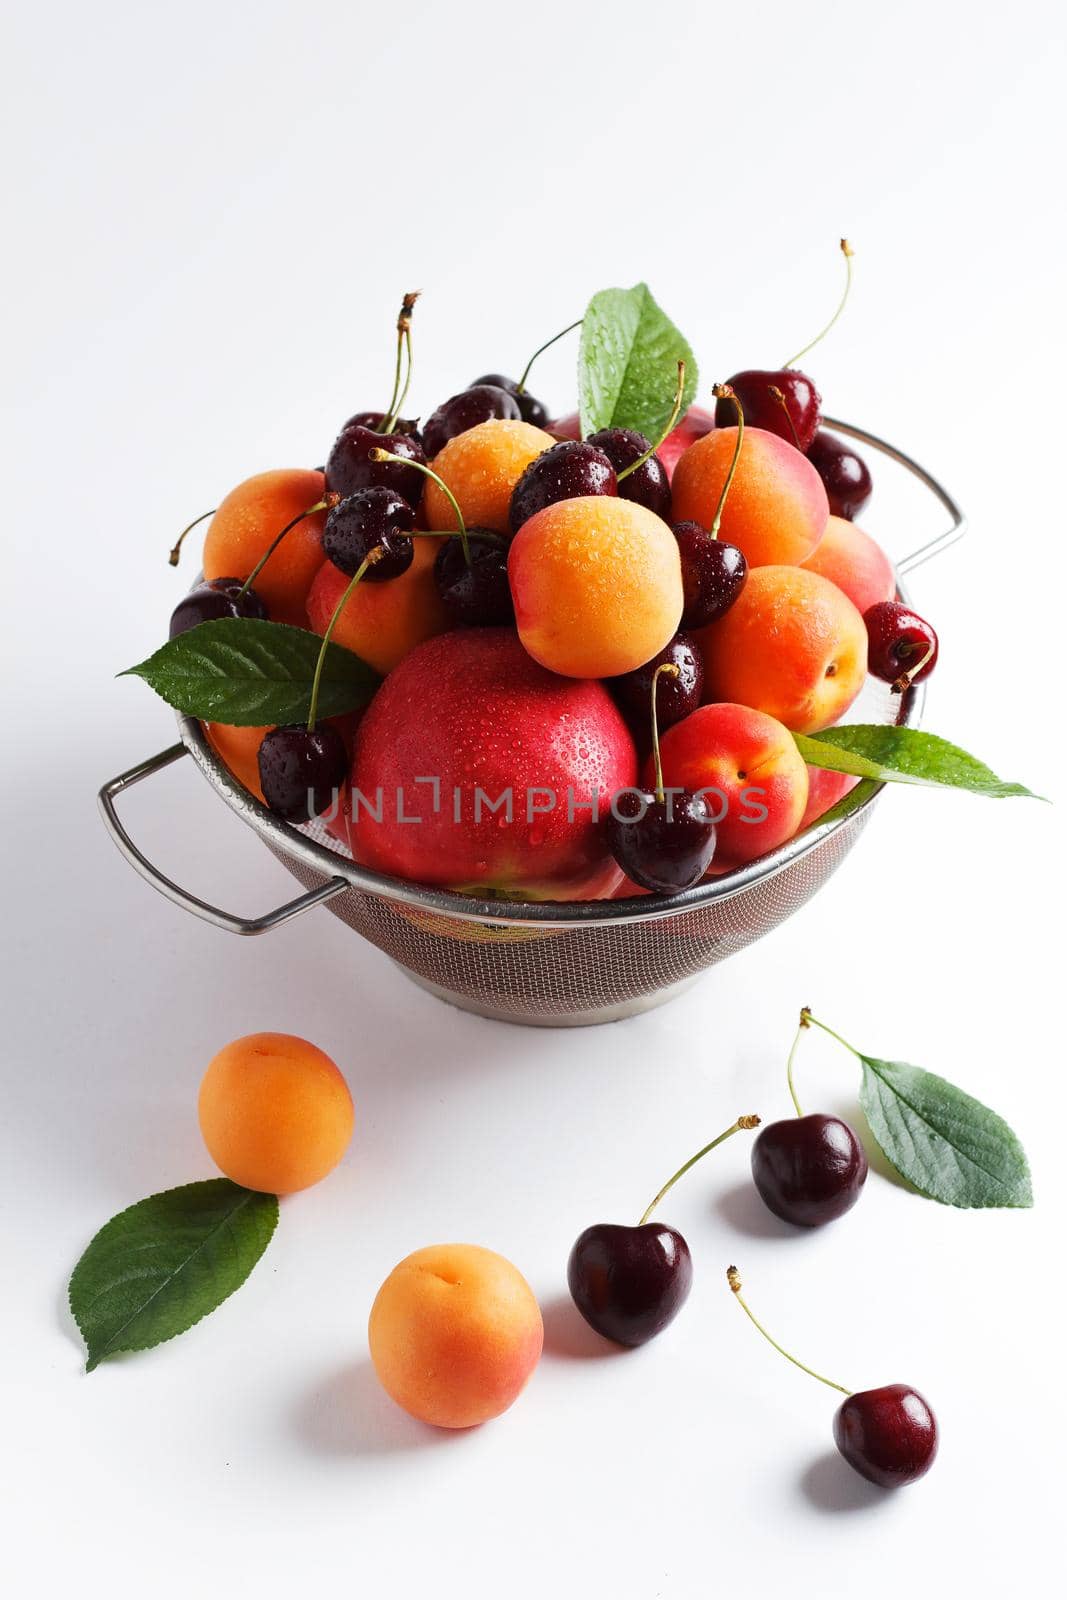 apricots and cherries in a metal bowl on a white background. by lara29